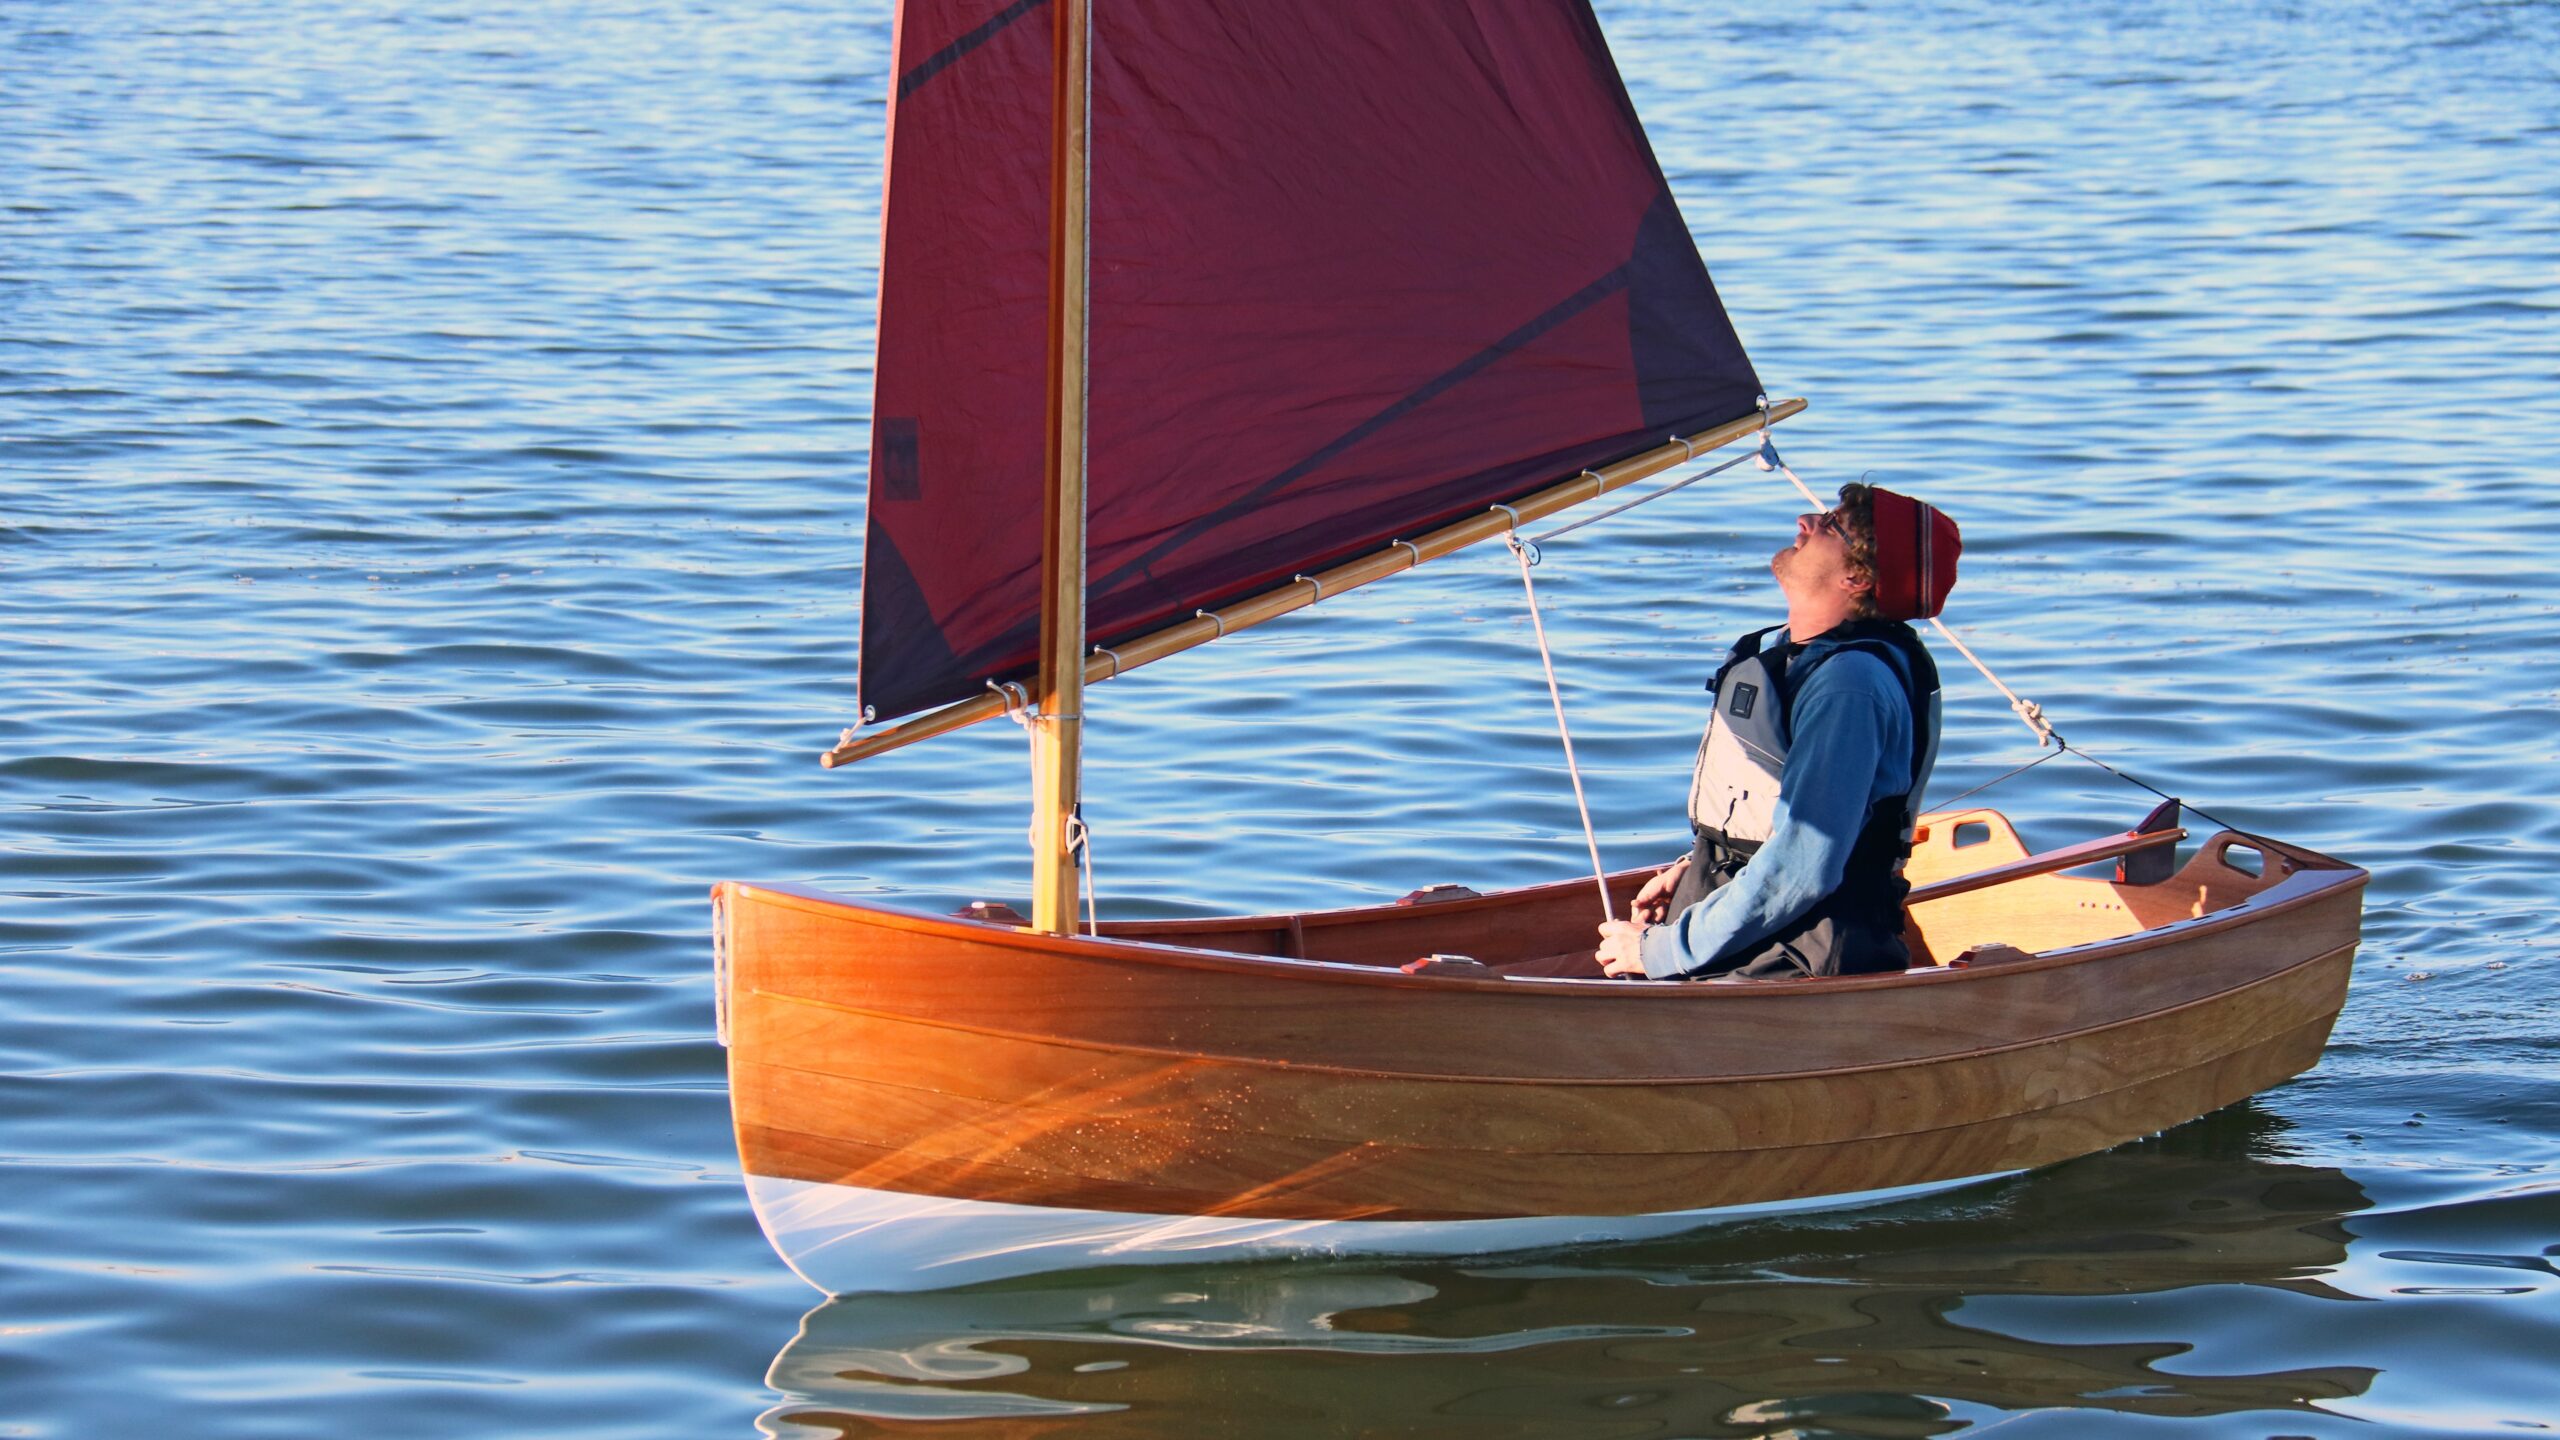 Build Your Own Tenderly Dinghy